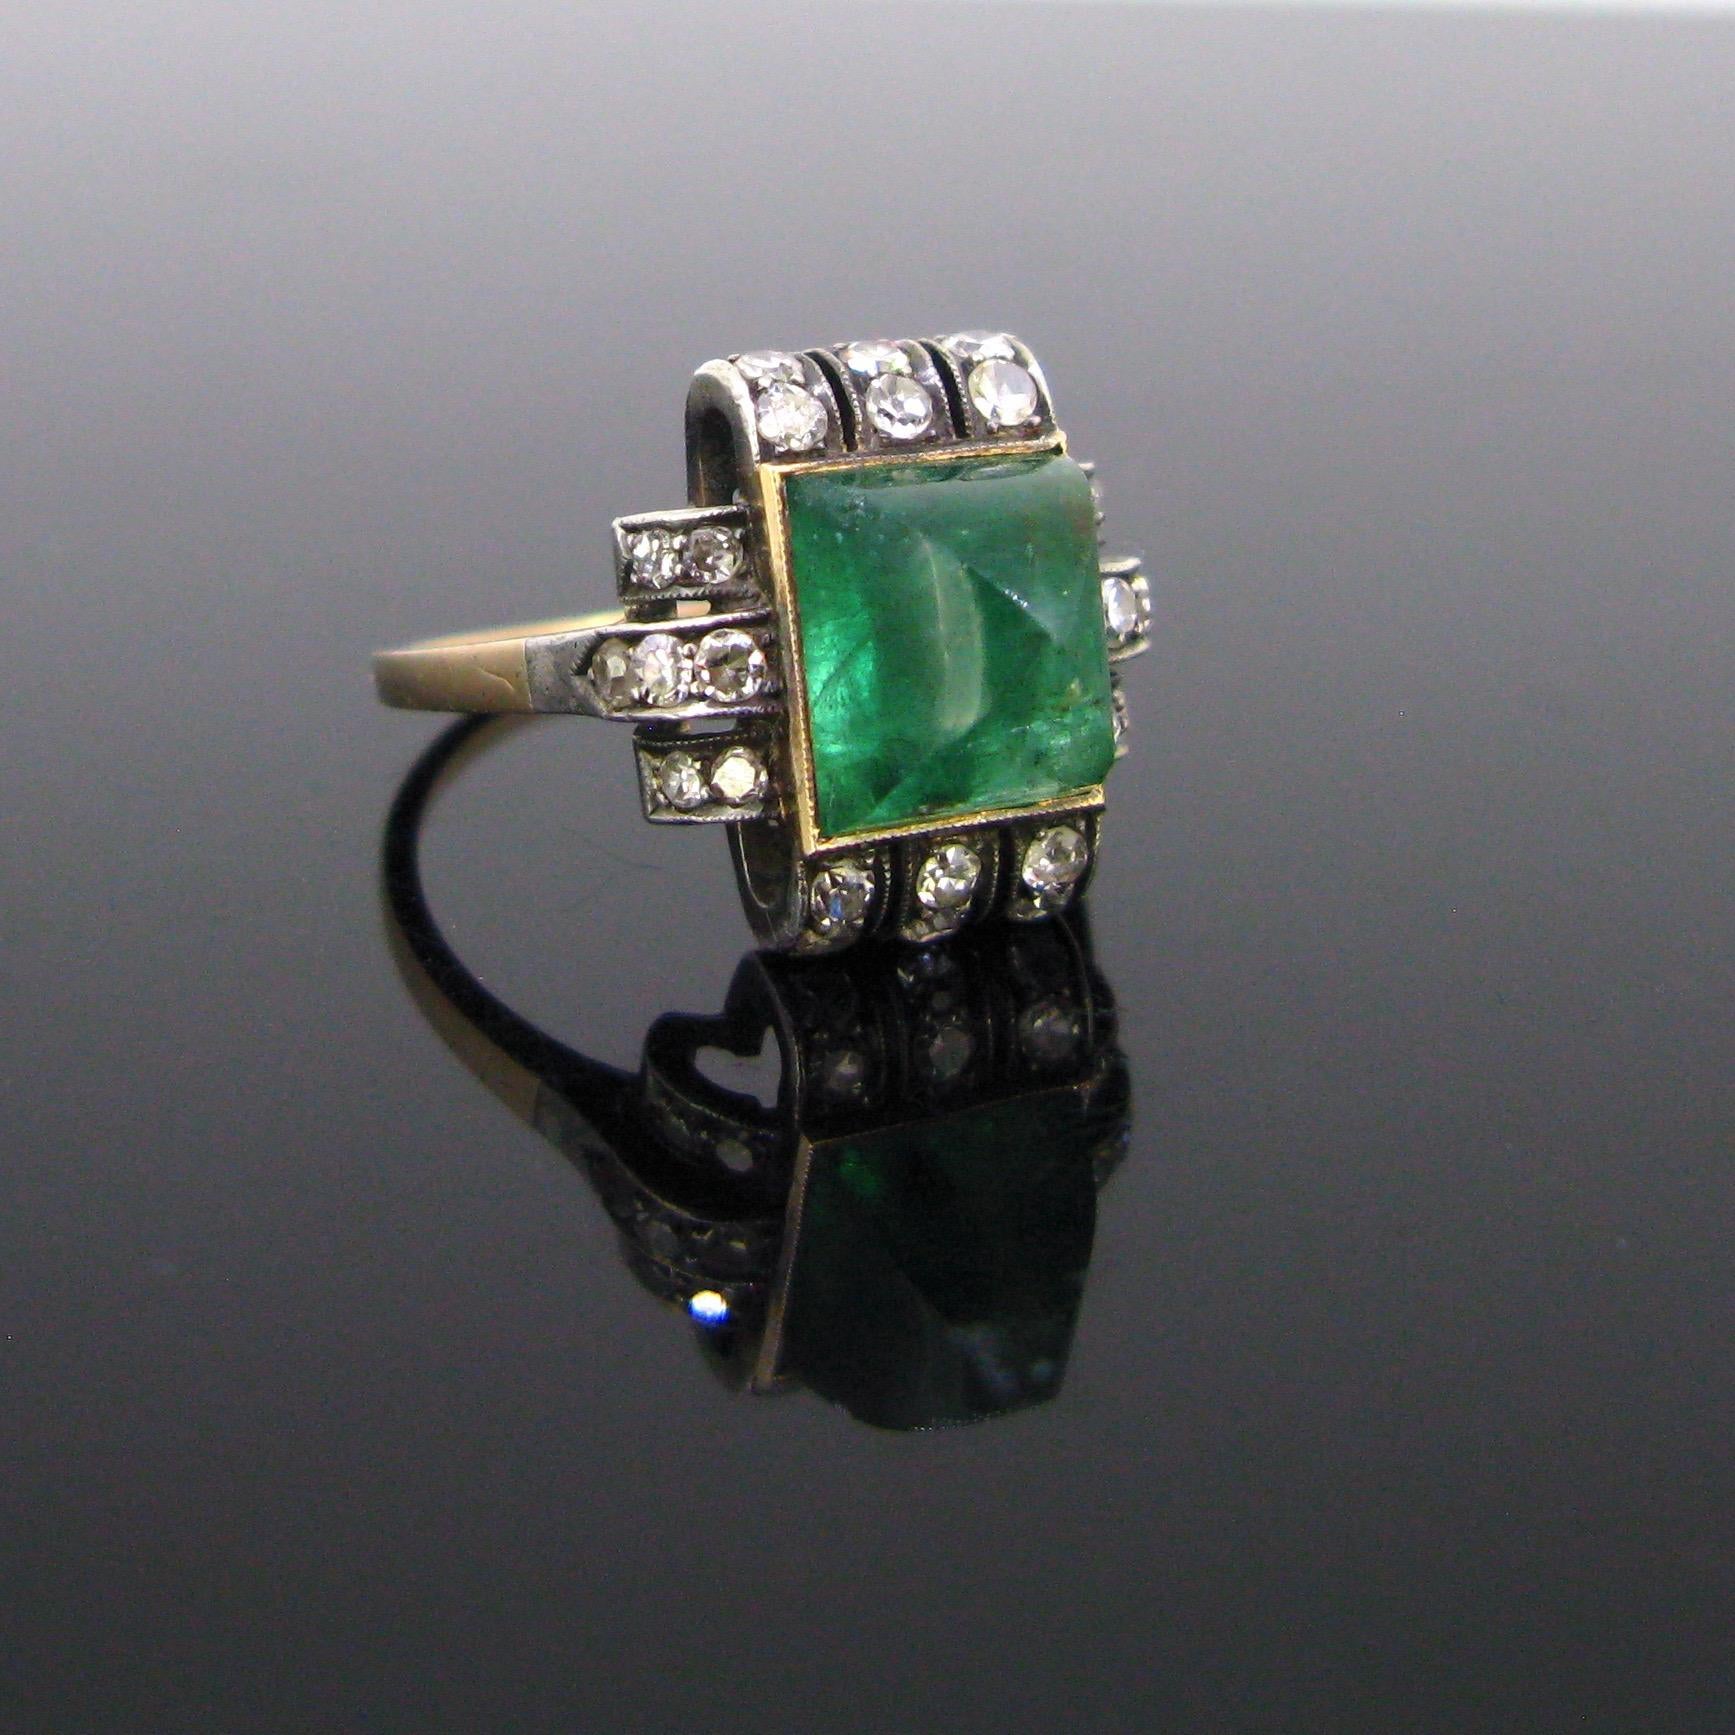 Weight:	3,5r

Circa:	Art Deco, circa 1920

Metal:	Gold and Silver

Stones:	1 Emerald
•	Cut:	Sugarloaf
•	Total carat weight:	3.15ct approximately
•	Dimensions:	8.4x7.5x6.8mm

Others:	26 single cut diamonds
•	Total carat weight: 	0.30ct